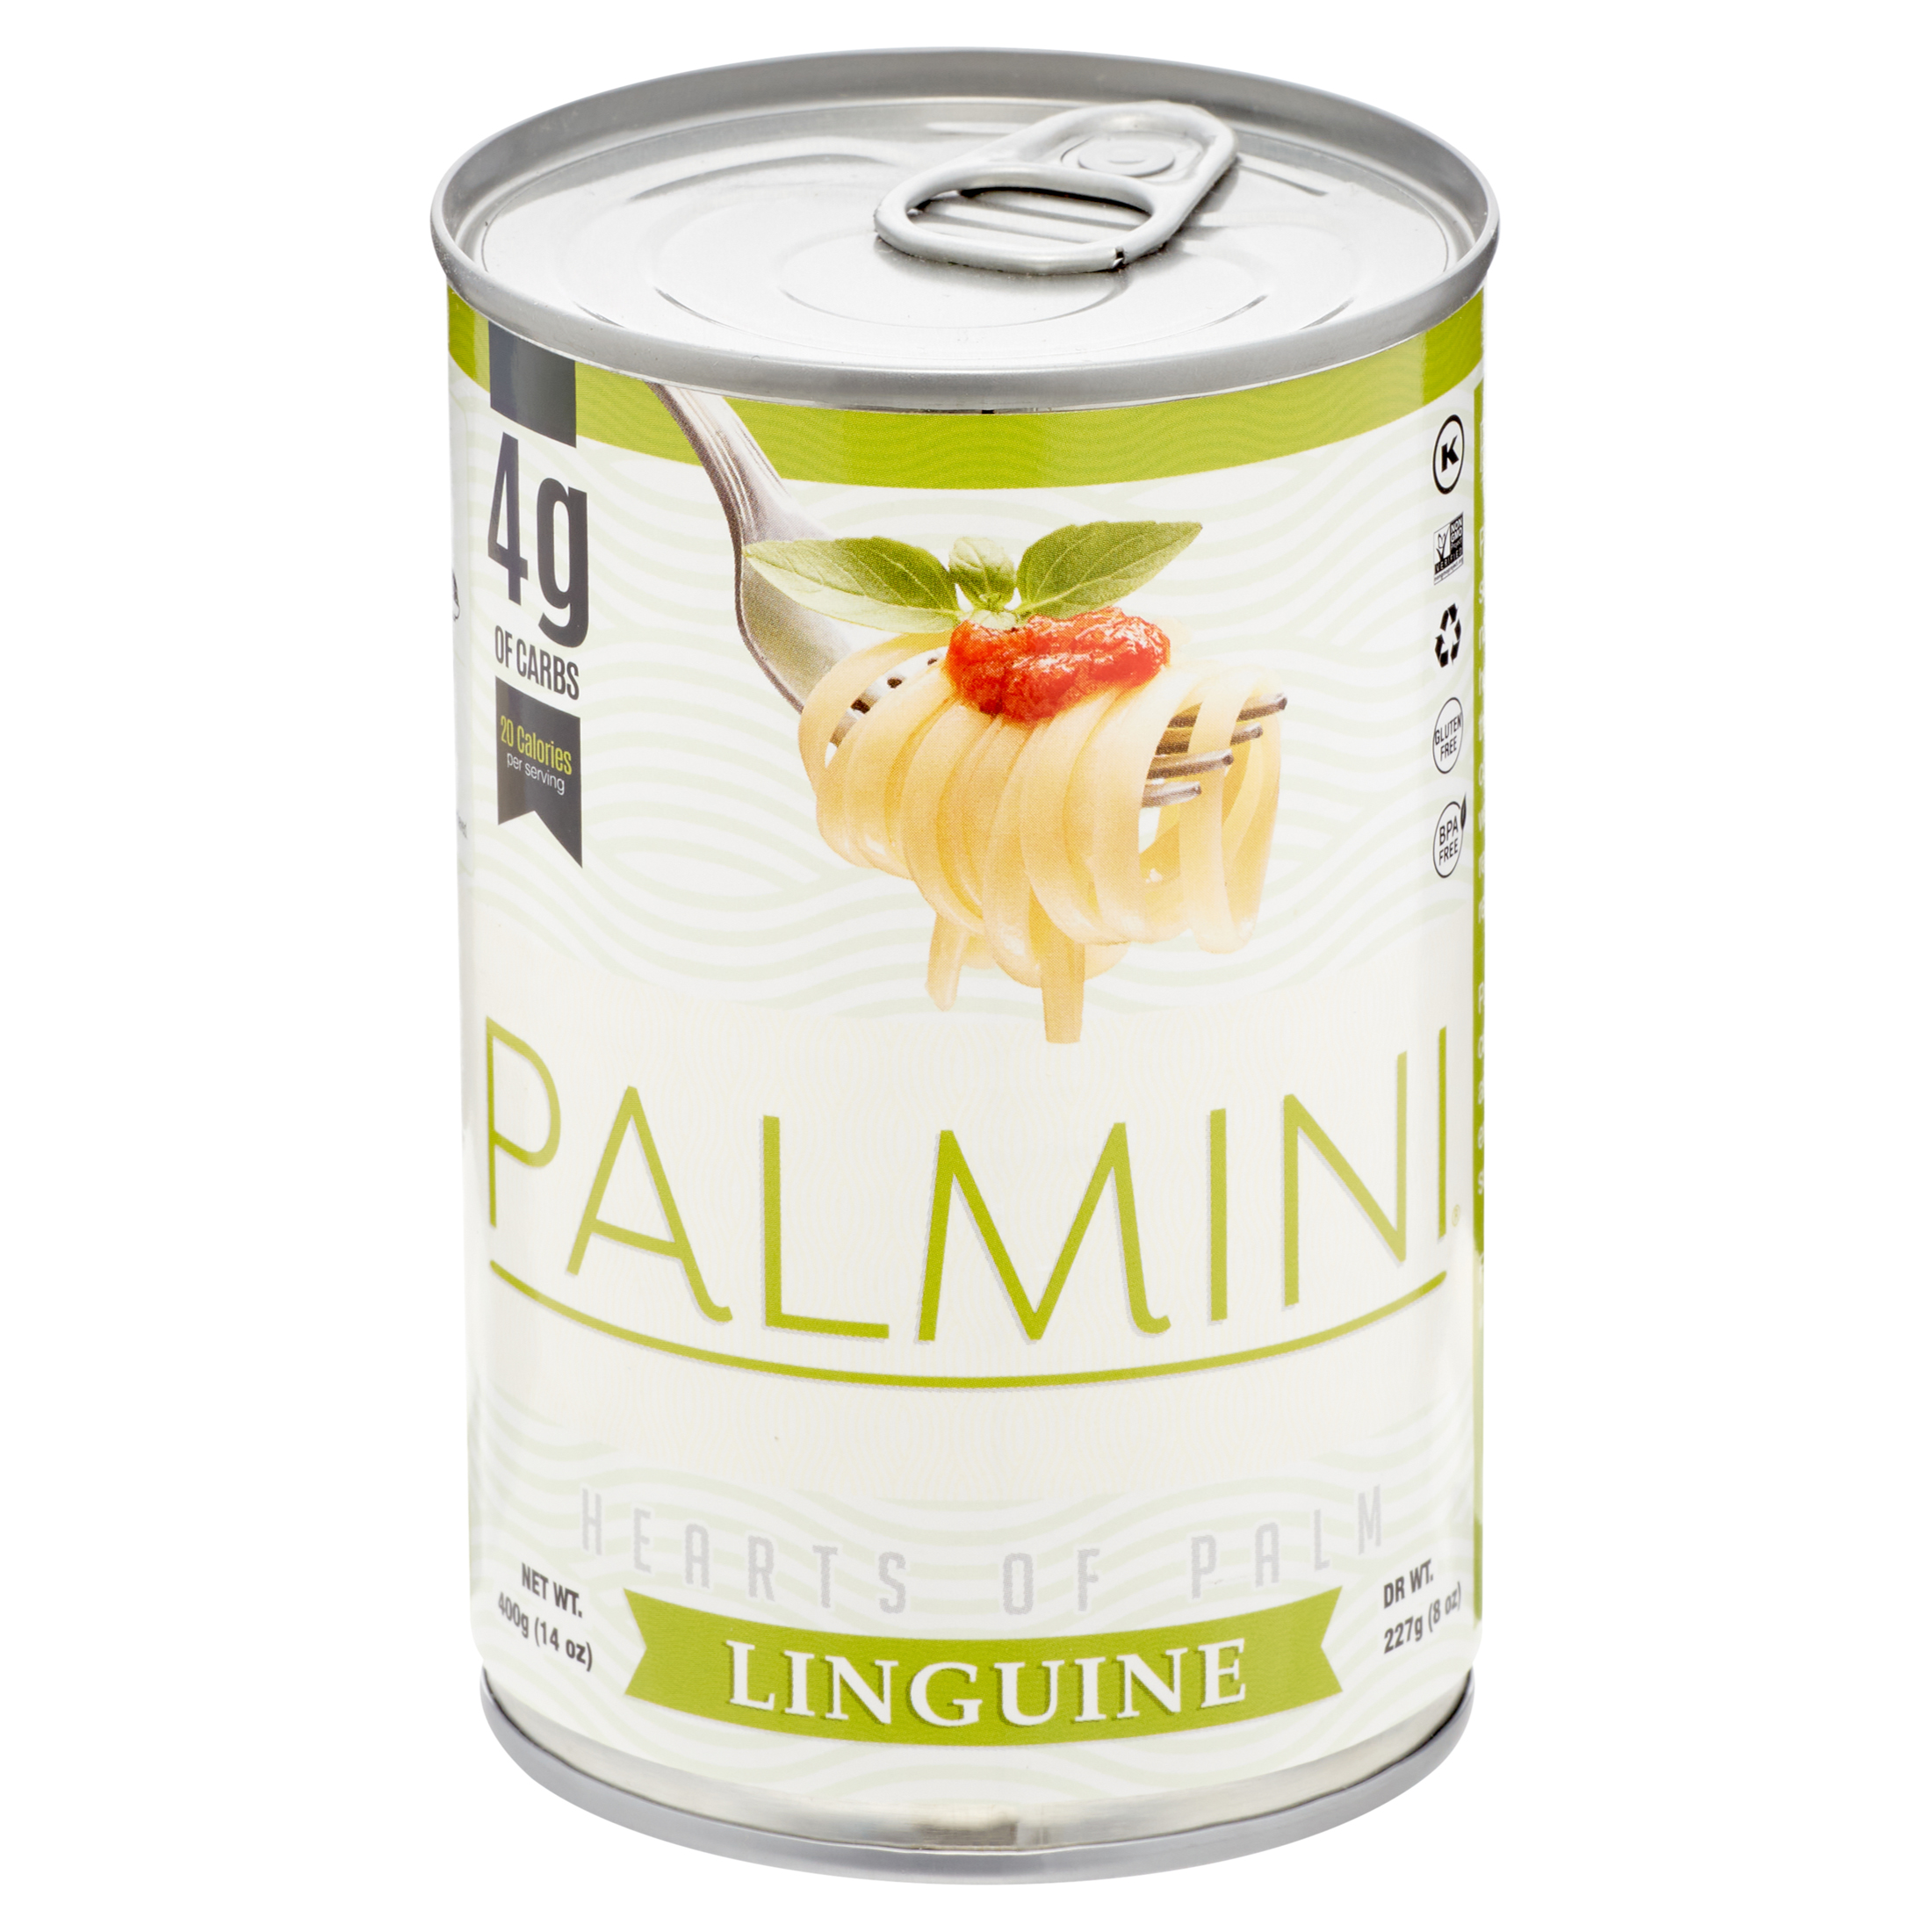 Palmini Hearts Of Palm Linguine Pasta, 14 oz Can - image 3 of 9